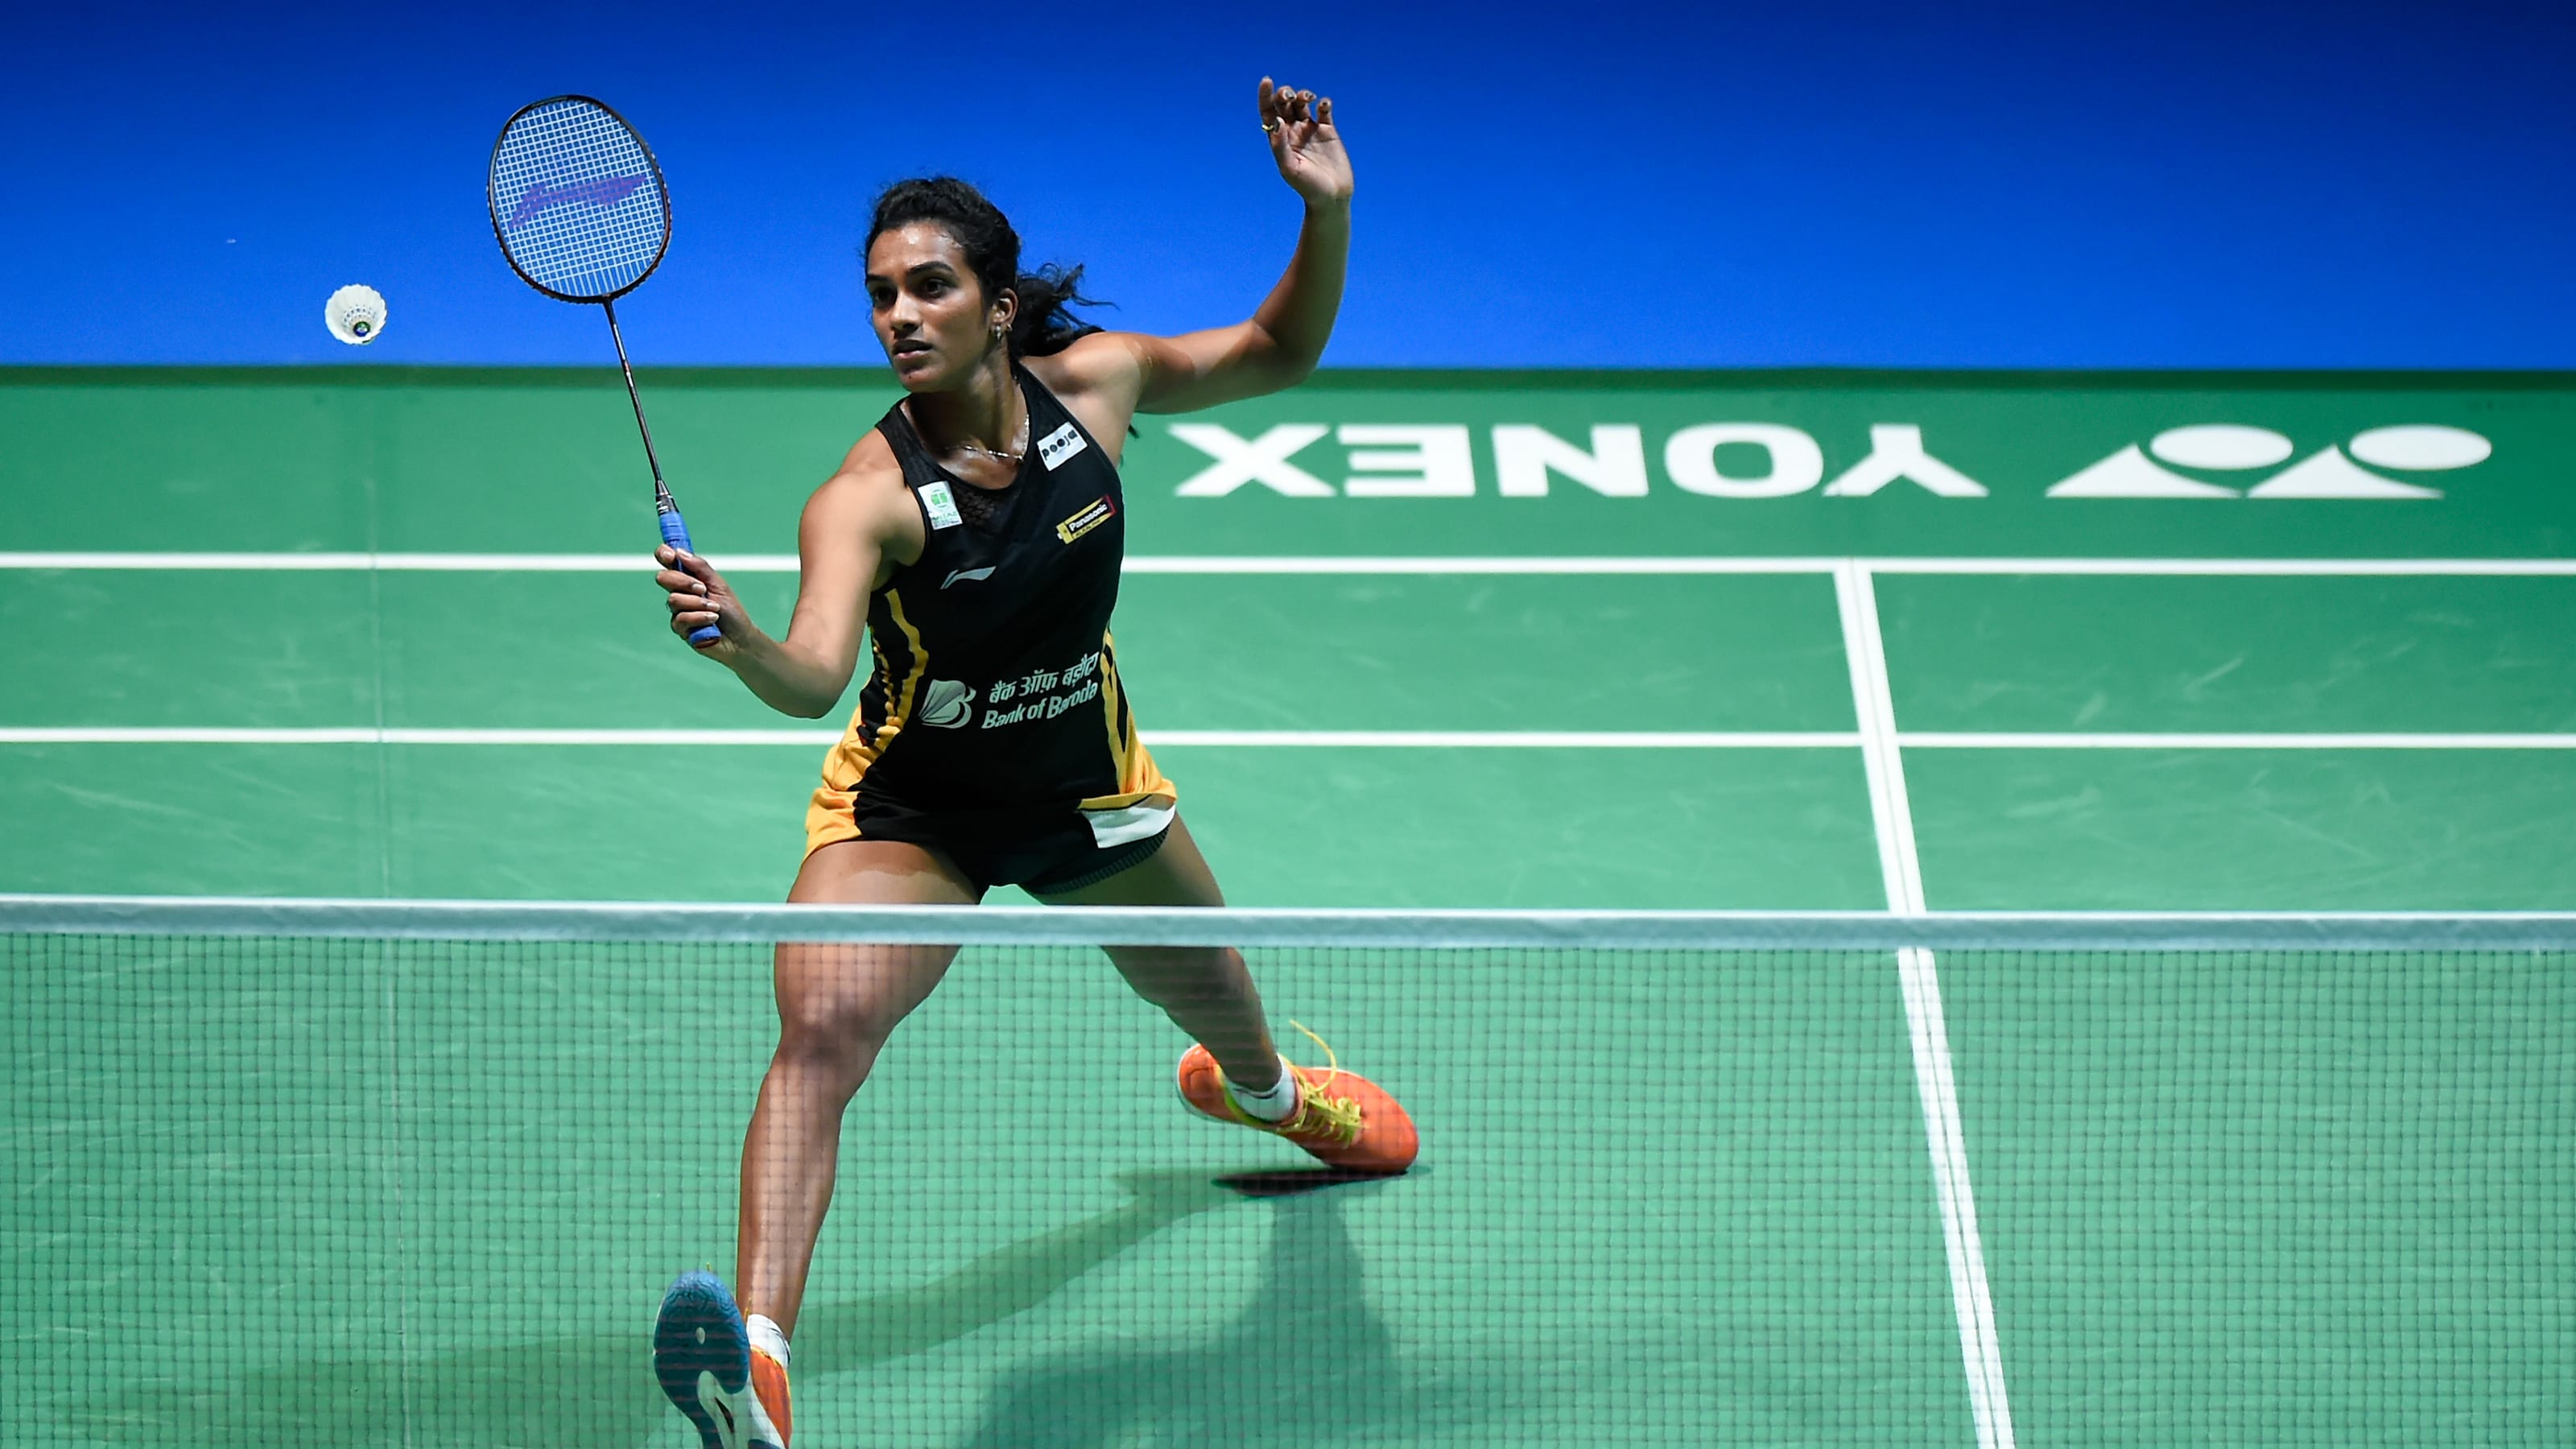 New Coach For Pv Sindhu And Co Before 2020 Olympics